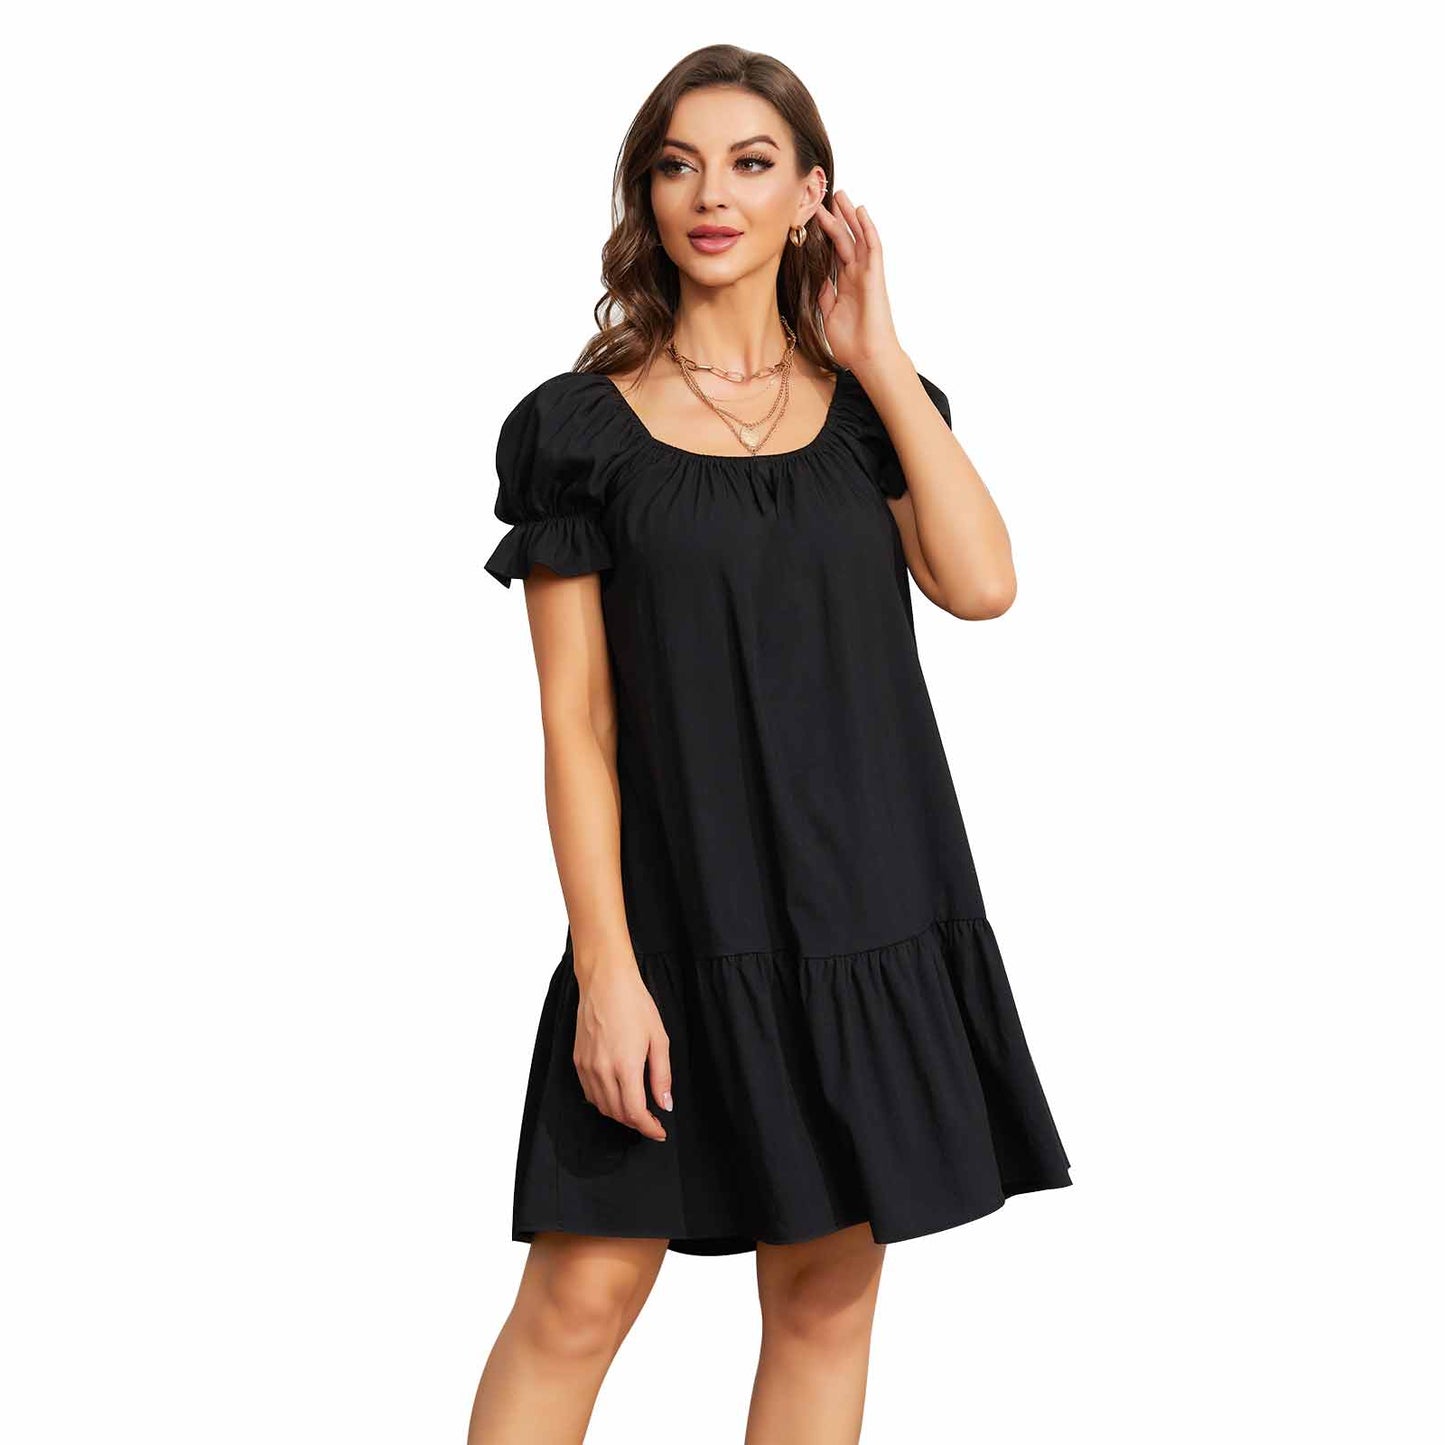 Exlura Women’s Square Neck Puff Short Sleeve Dress Off Shoulder Tiered Ruffle A-Line Babydoll Mini Party Dress